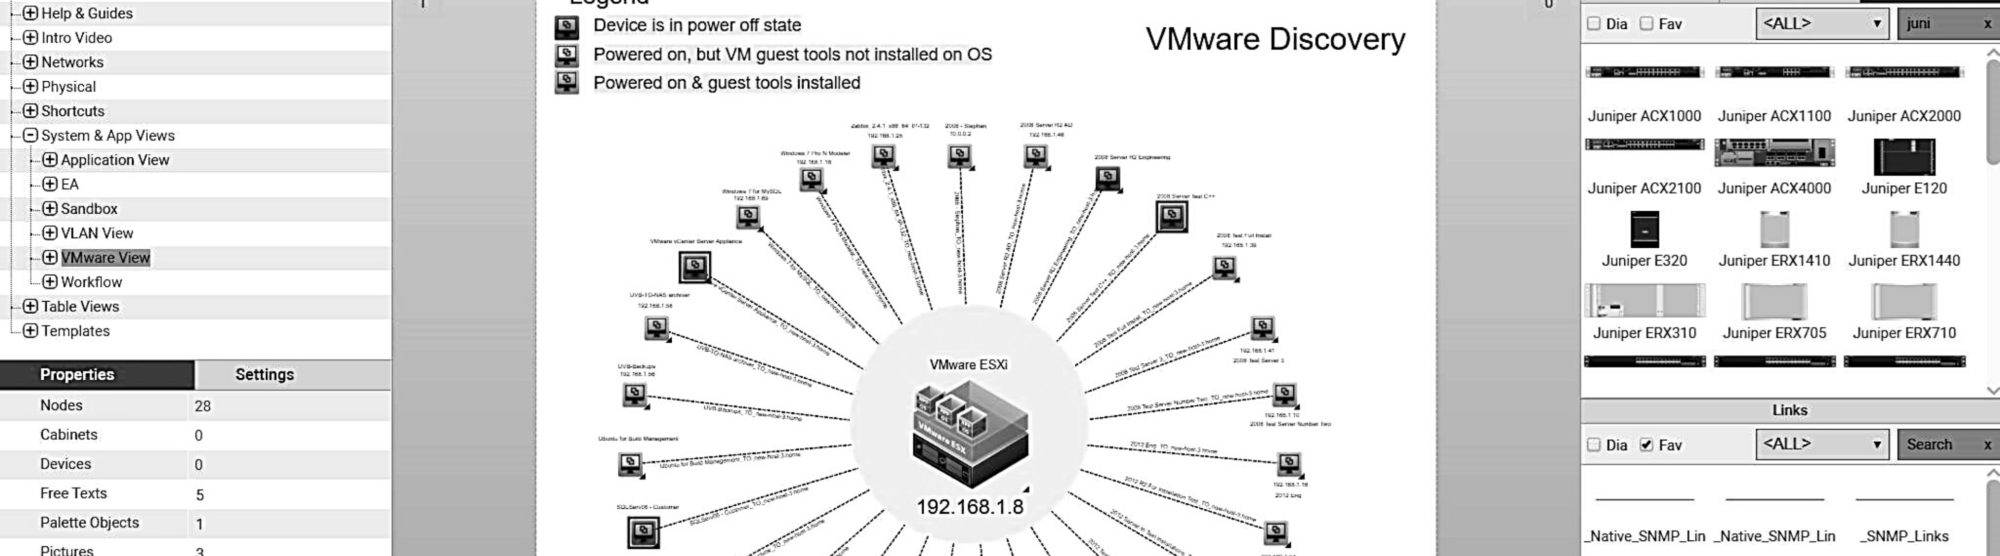 image of VMware discovery in netTerrain network diagram software